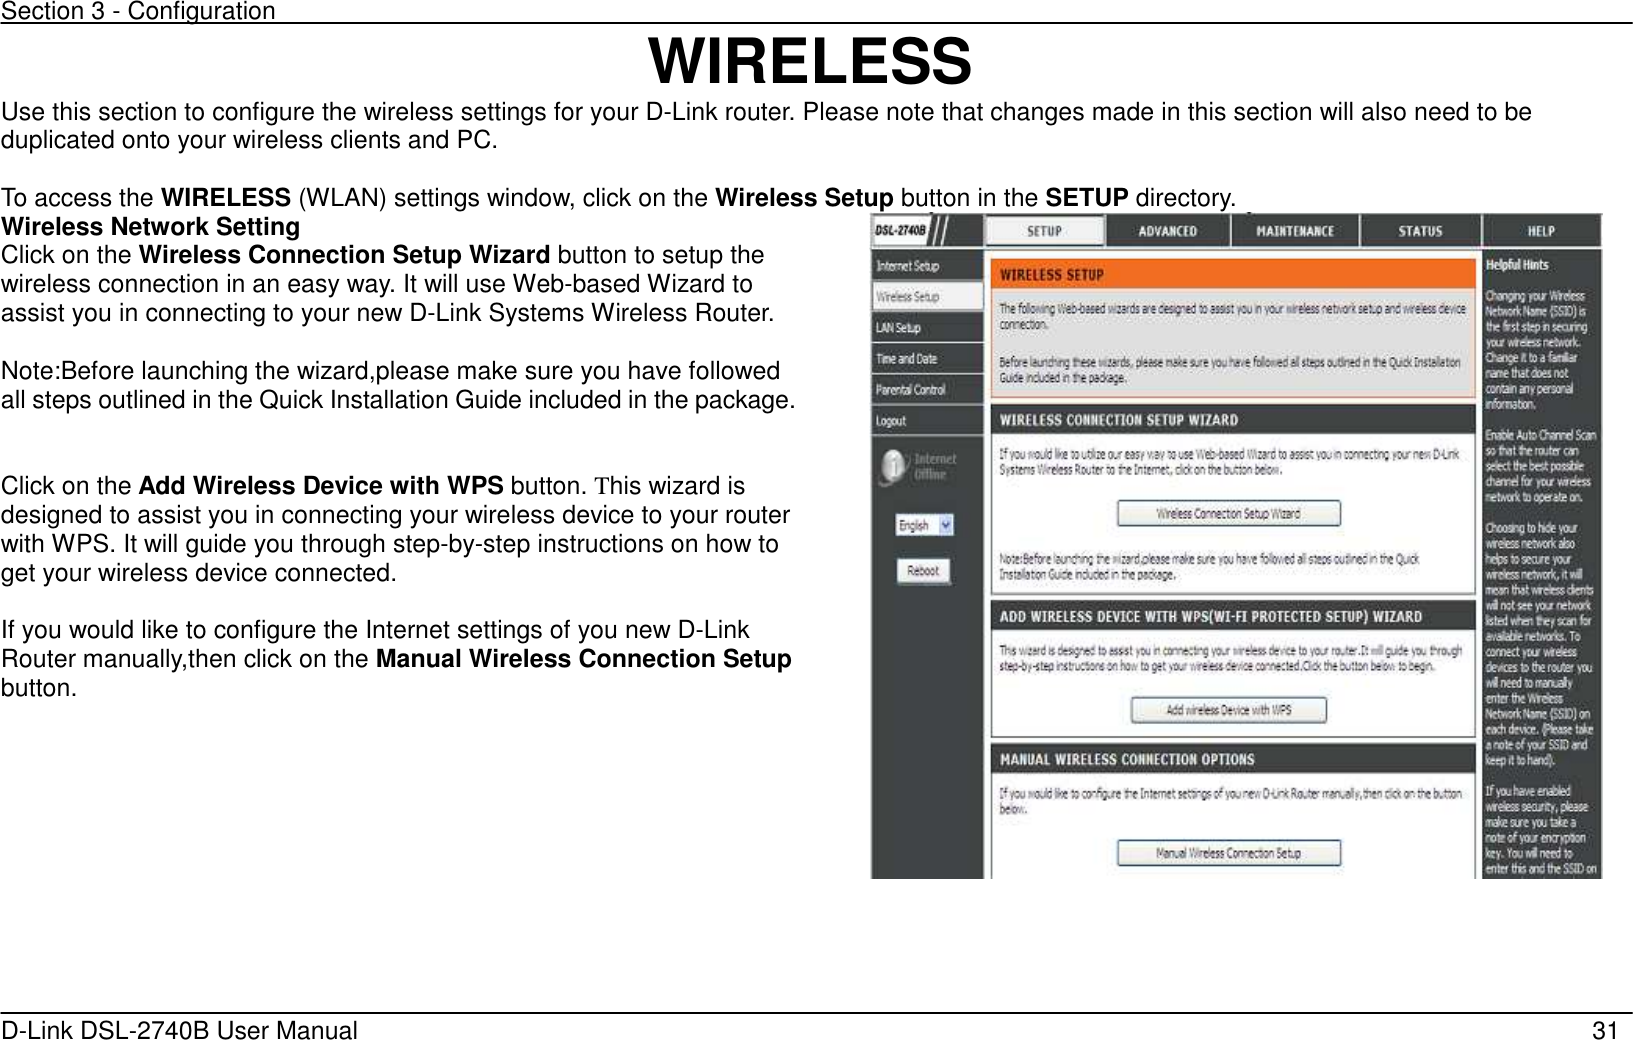 Section 3 - Configuration   D-Link DSL-2740B User Manual                                                  31 WIRELESS Use this section to configure the wireless settings for your D-Link router. Please note that changes made in this section will also need to be duplicated onto your wireless clients and PC.  To access the WIRELESS (WLAN) settings window, click on the Wireless Setup button in the SETUP directory.   Wireless Network Setting Click on the Wireless Connection Setup Wizard button to setup the wireless connection in an easy way. It will use Web-based Wizard to assist you in connecting to your new D-Link Systems Wireless Router. Note:Before launching the wizard,please make sure you have followed all steps outlined in the Quick Installation Guide included in the package.  Click on the Add Wireless Device with WPS button. This wizard is designed to assist you in connecting your wireless device to your router with WPS. It will guide you through step-by-step instructions on how to get your wireless device connected.  If you would like to configure the Internet settings of you new D-Link Router manually,then click on the Manual Wireless Connection Setup button.       